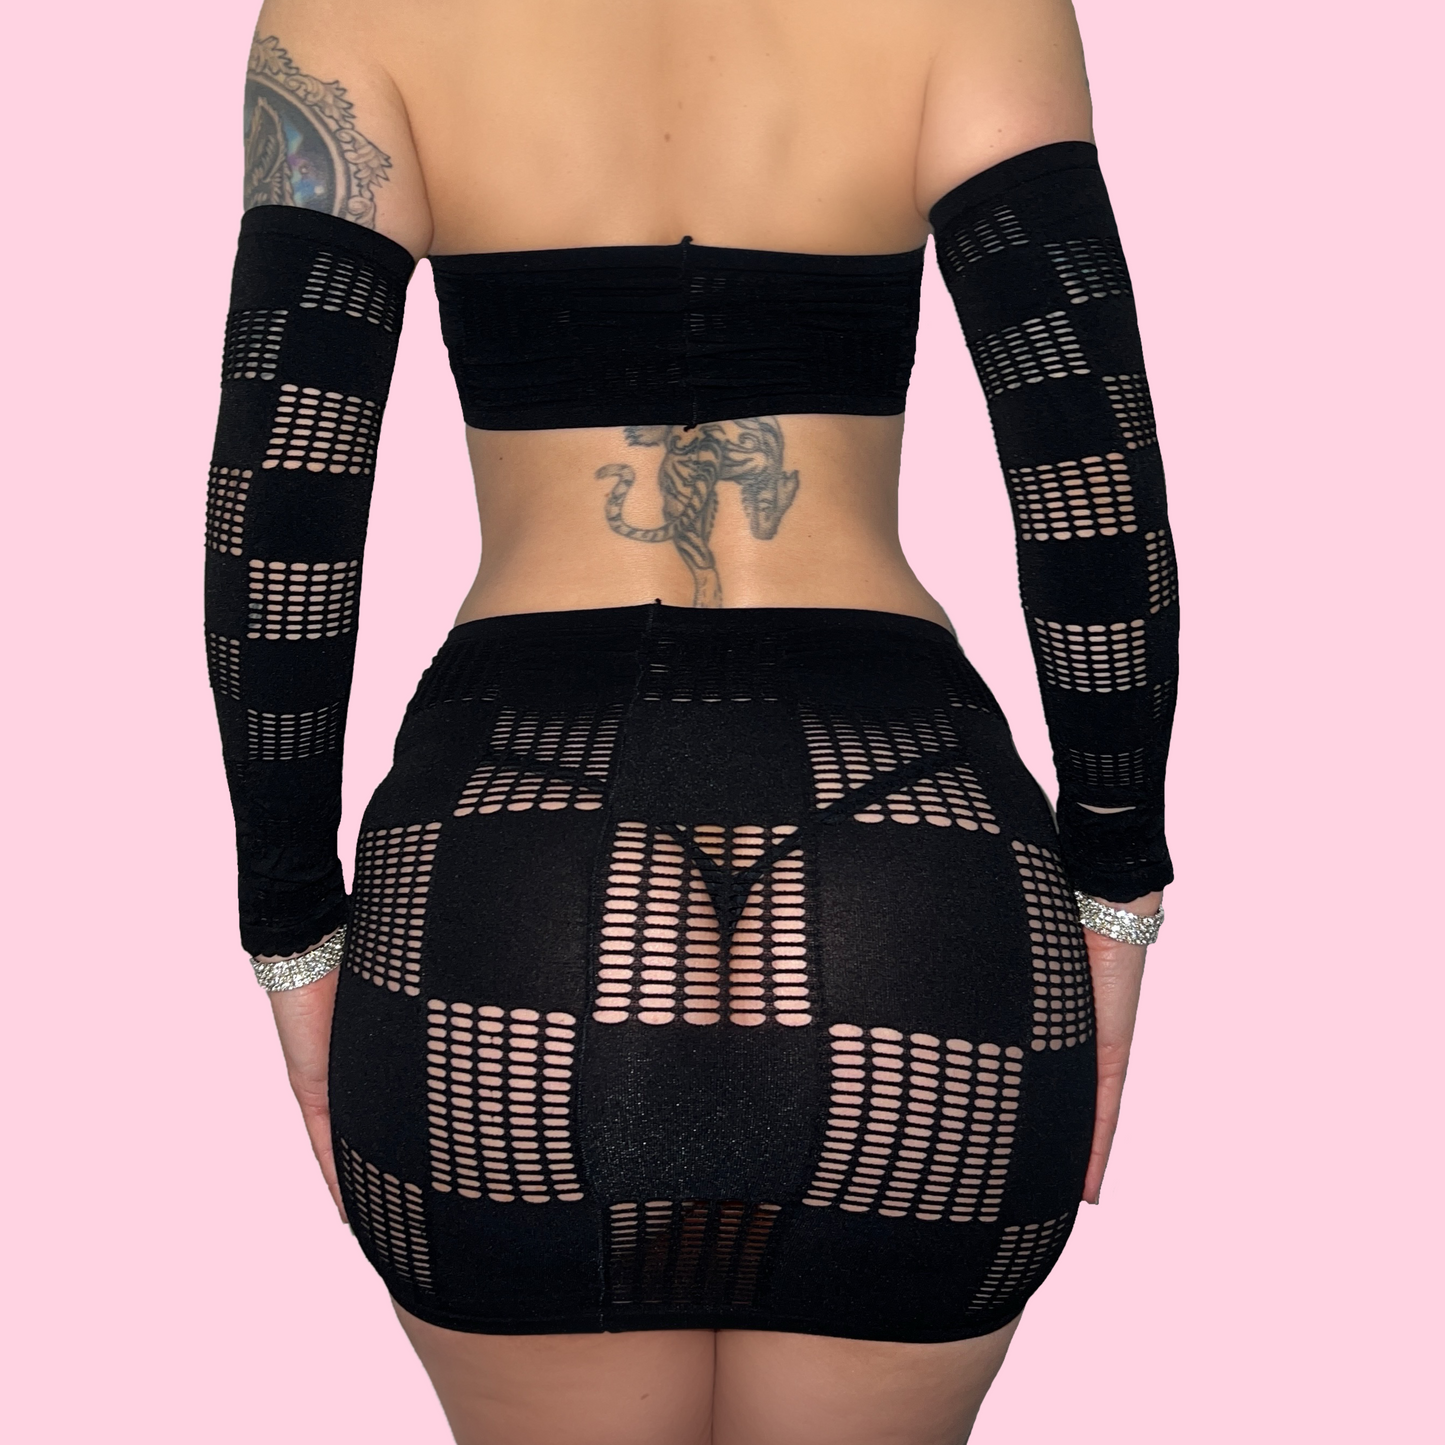 Here Comes Trouble Skirt Set: Black